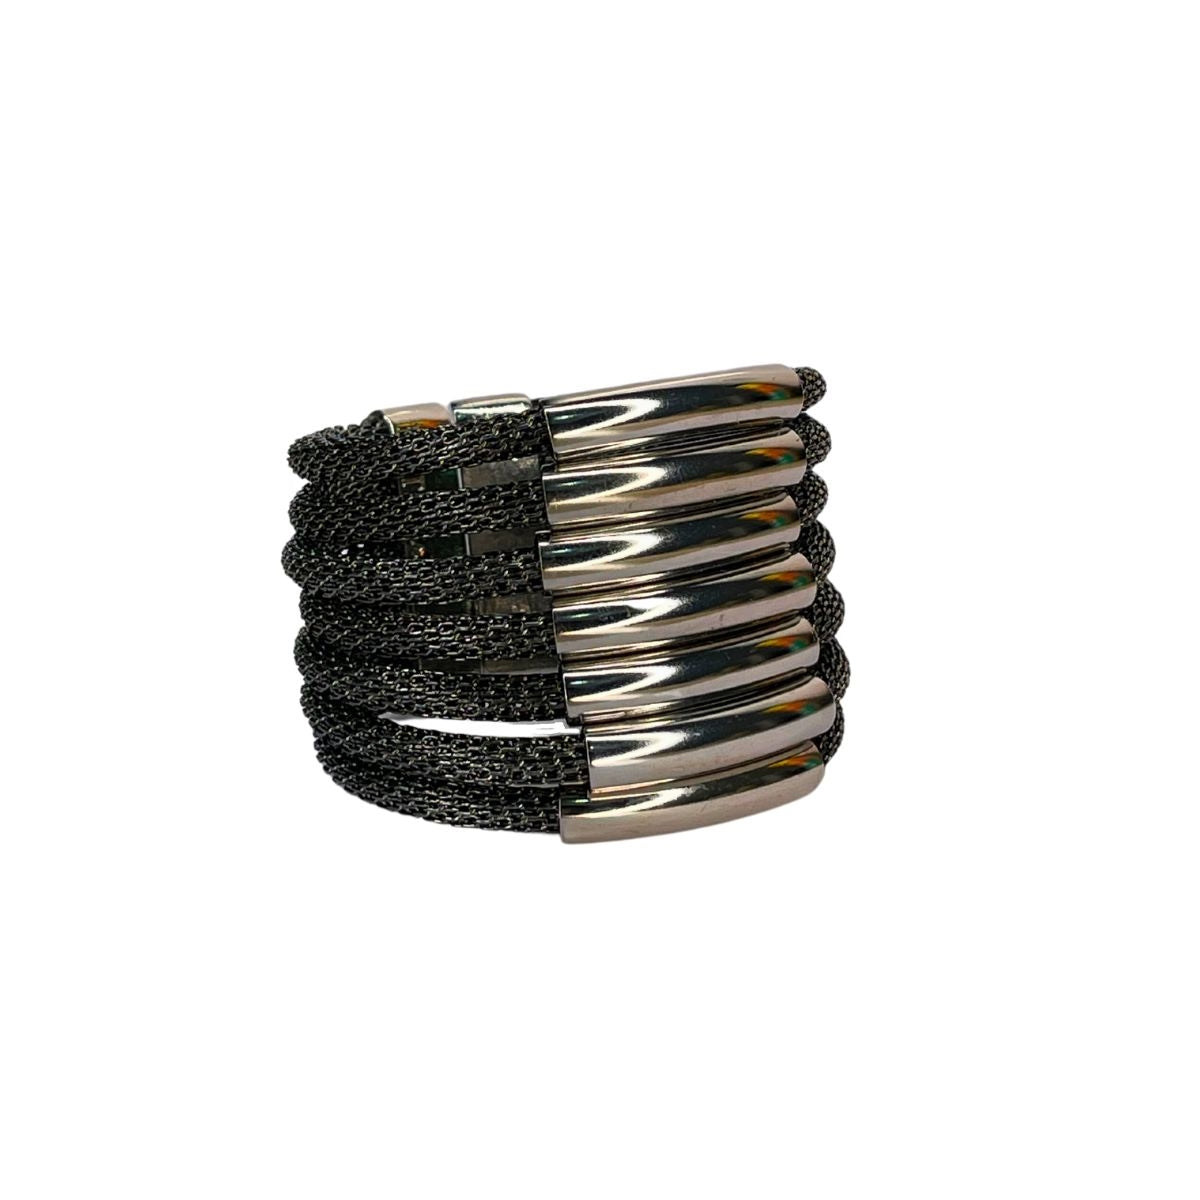 Lead aluminum mesh bracelet with gold-plated metals